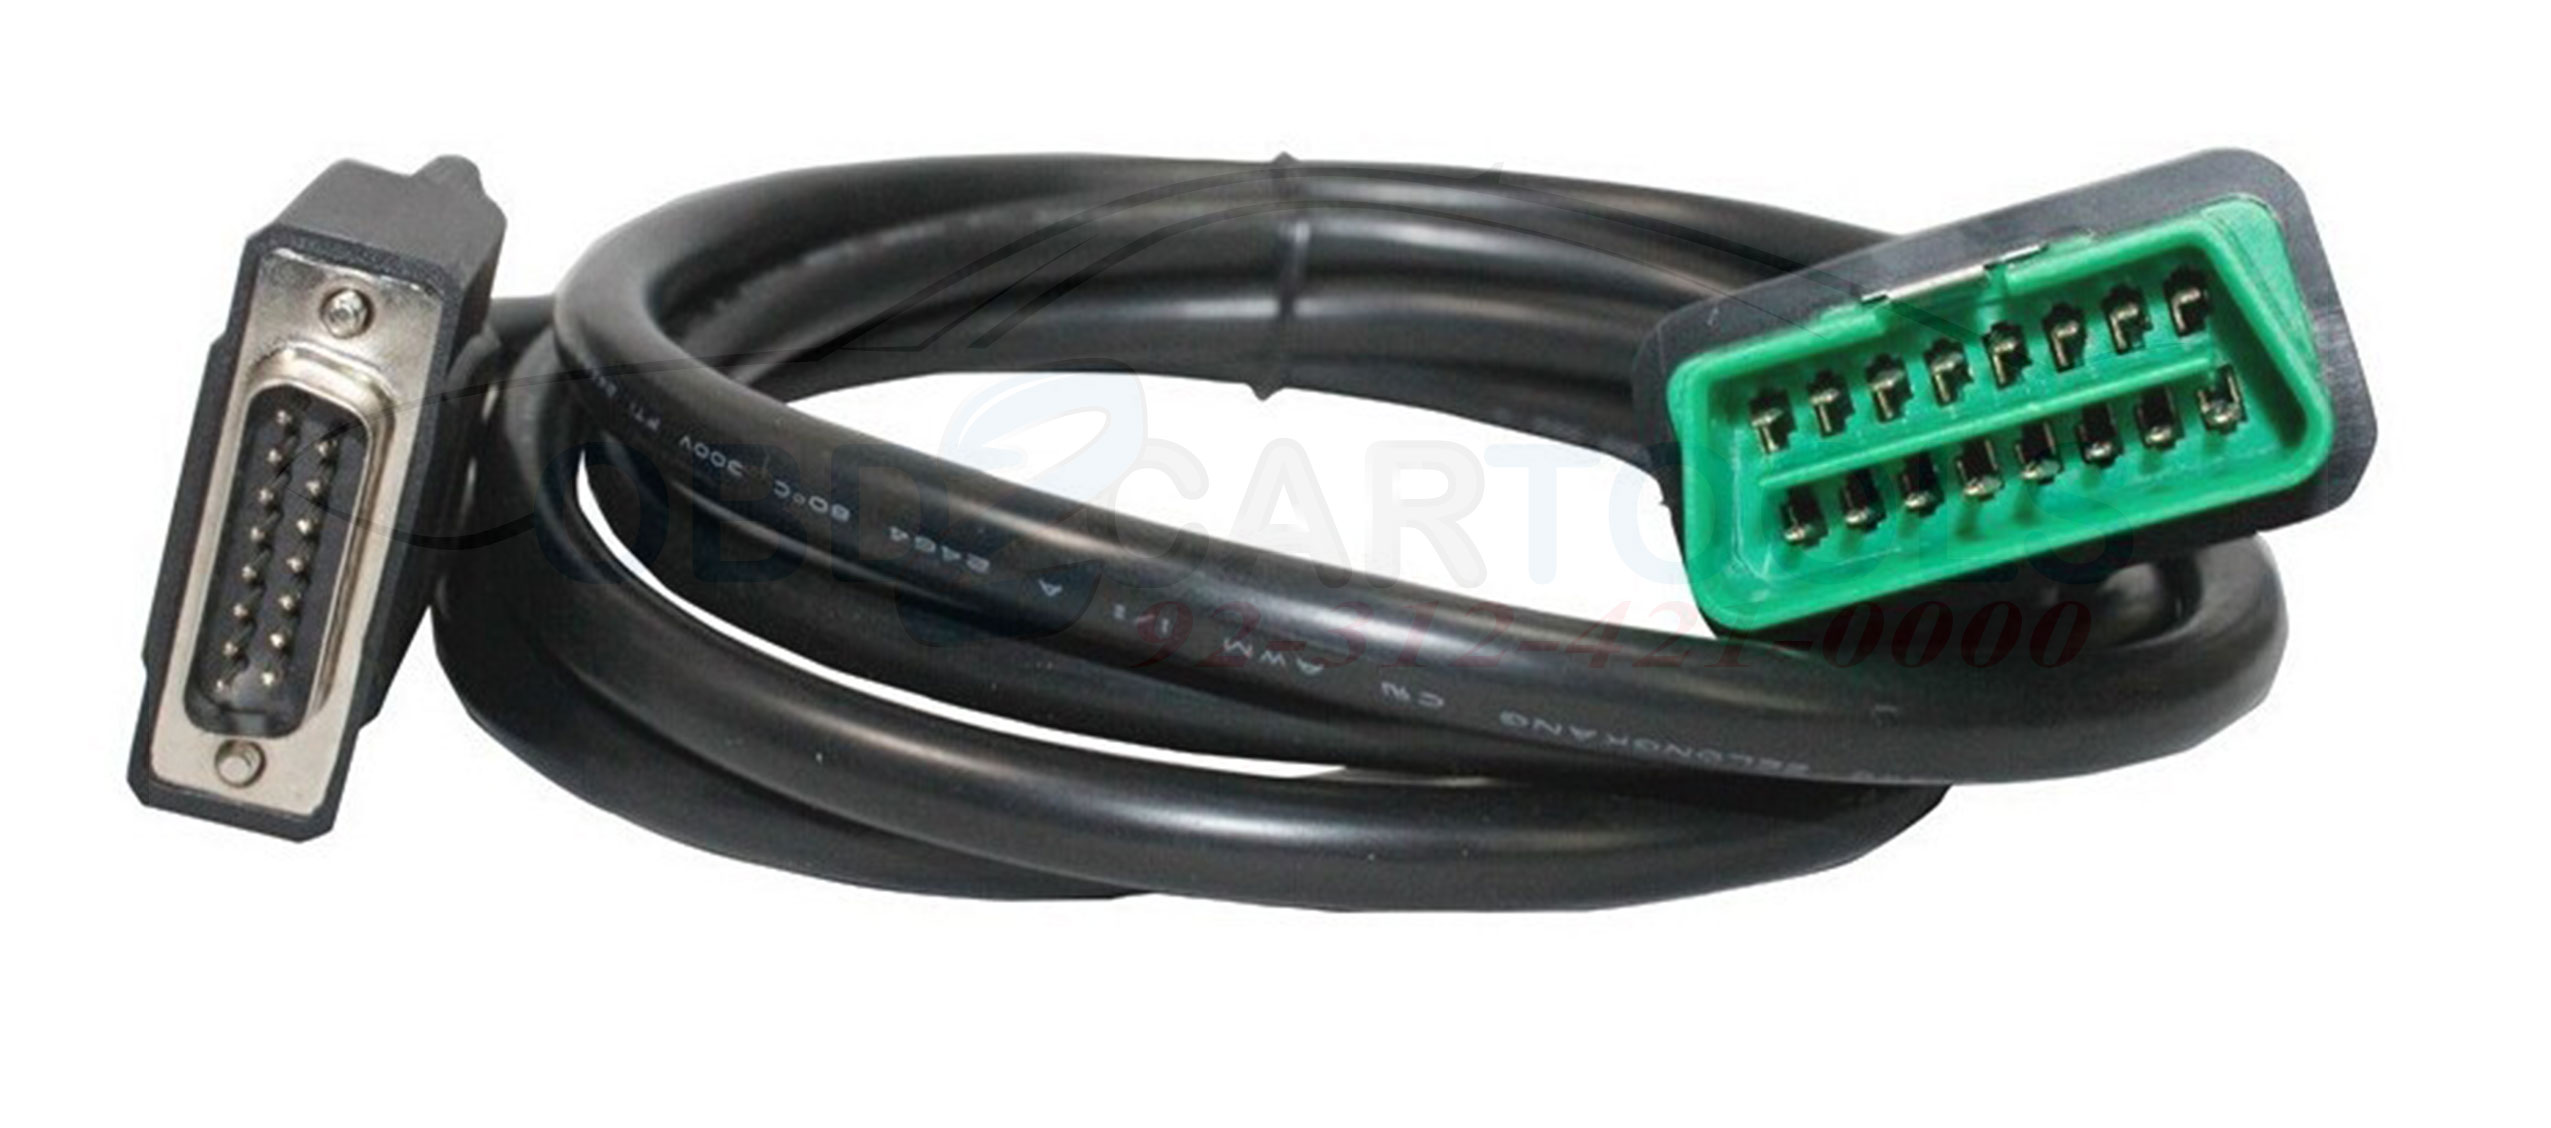 Product image for GENUINE VCS 16PIN OBD2 MAIN CABLE